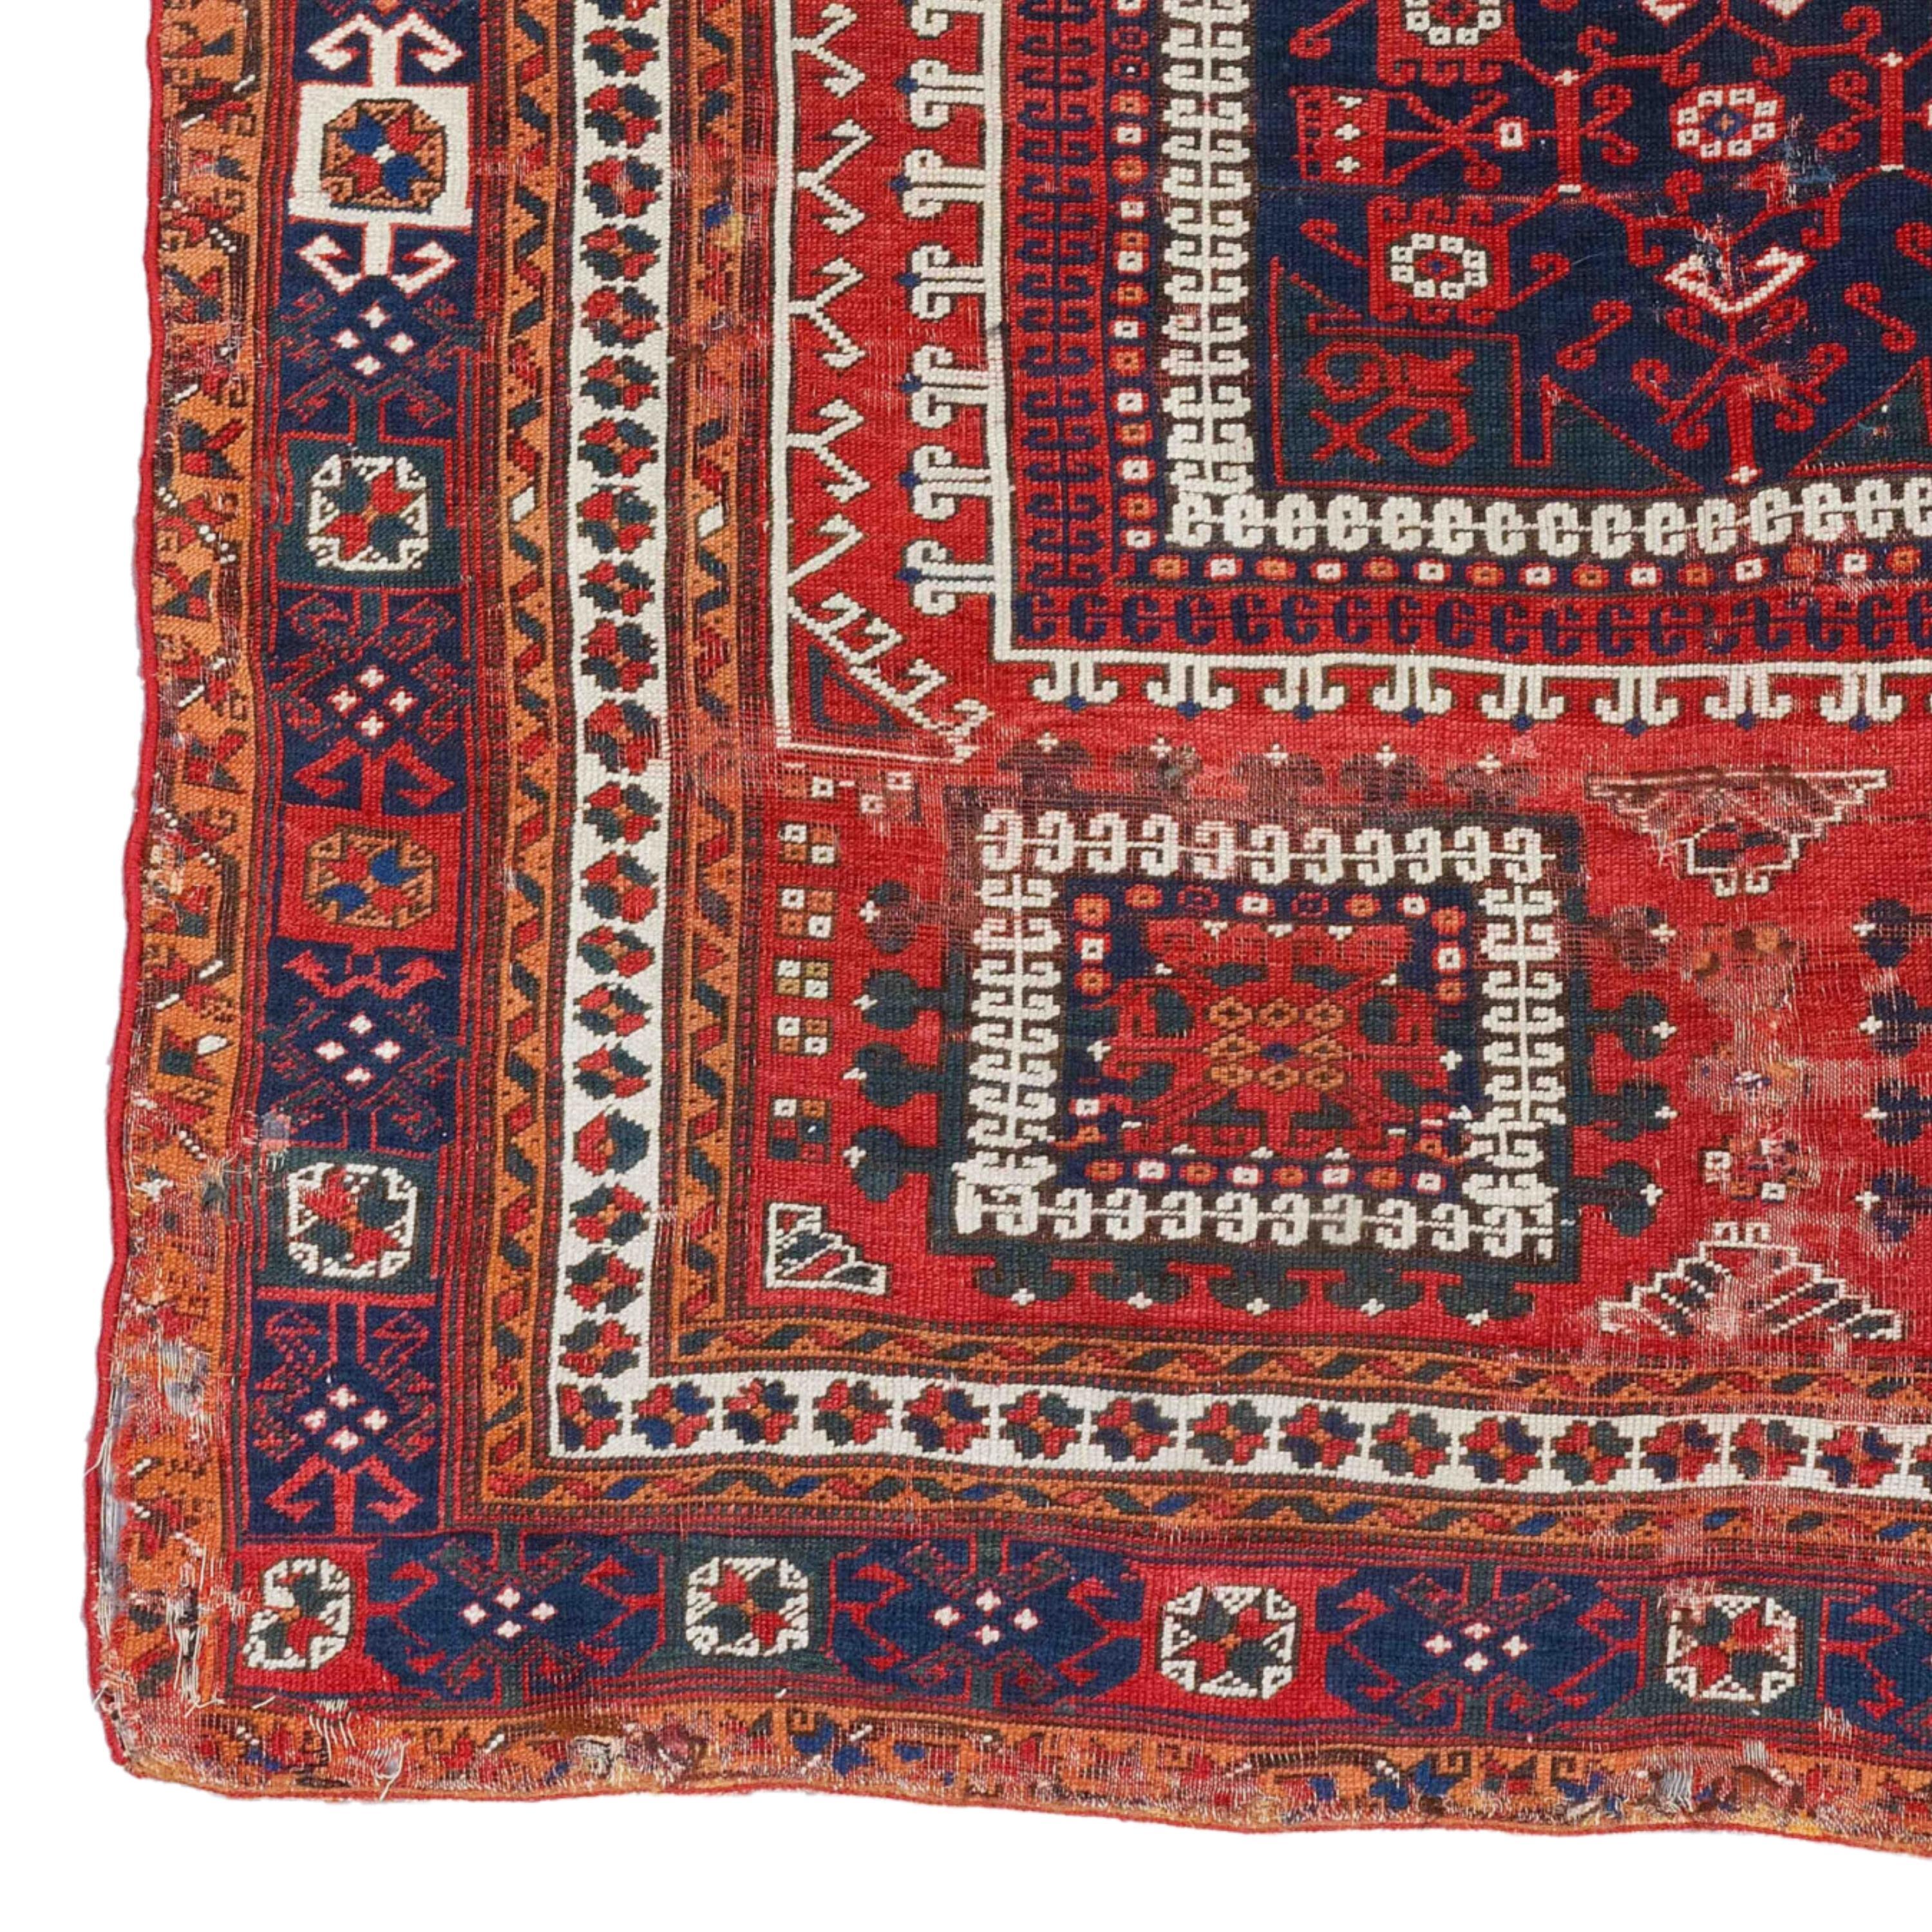 Antique Bergama Rug - Early 19th Century Anatolian Bergama Rug Size 146 x 161 cm (4,79 x 5,28 ft)
Red, blue, and white, are highly varied. Several designs, showing rows of panels or central medallion designs, preserve the fashions of much earlier